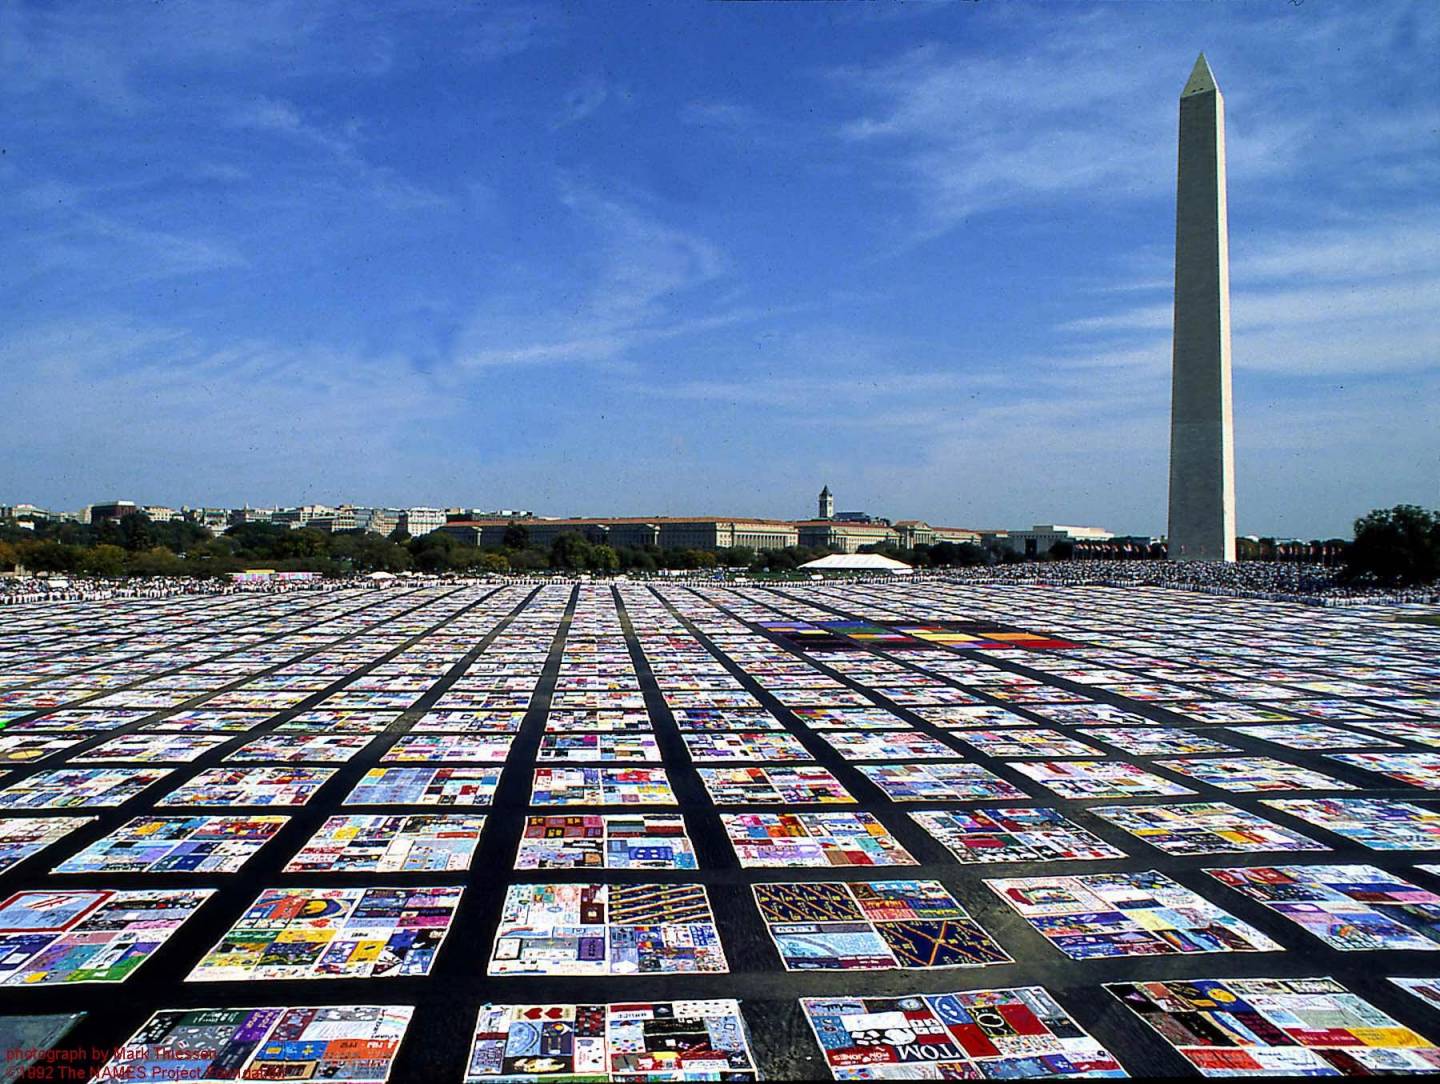 Display of AIDS quilts stretching out towards the horizon with Washington Monument in the background